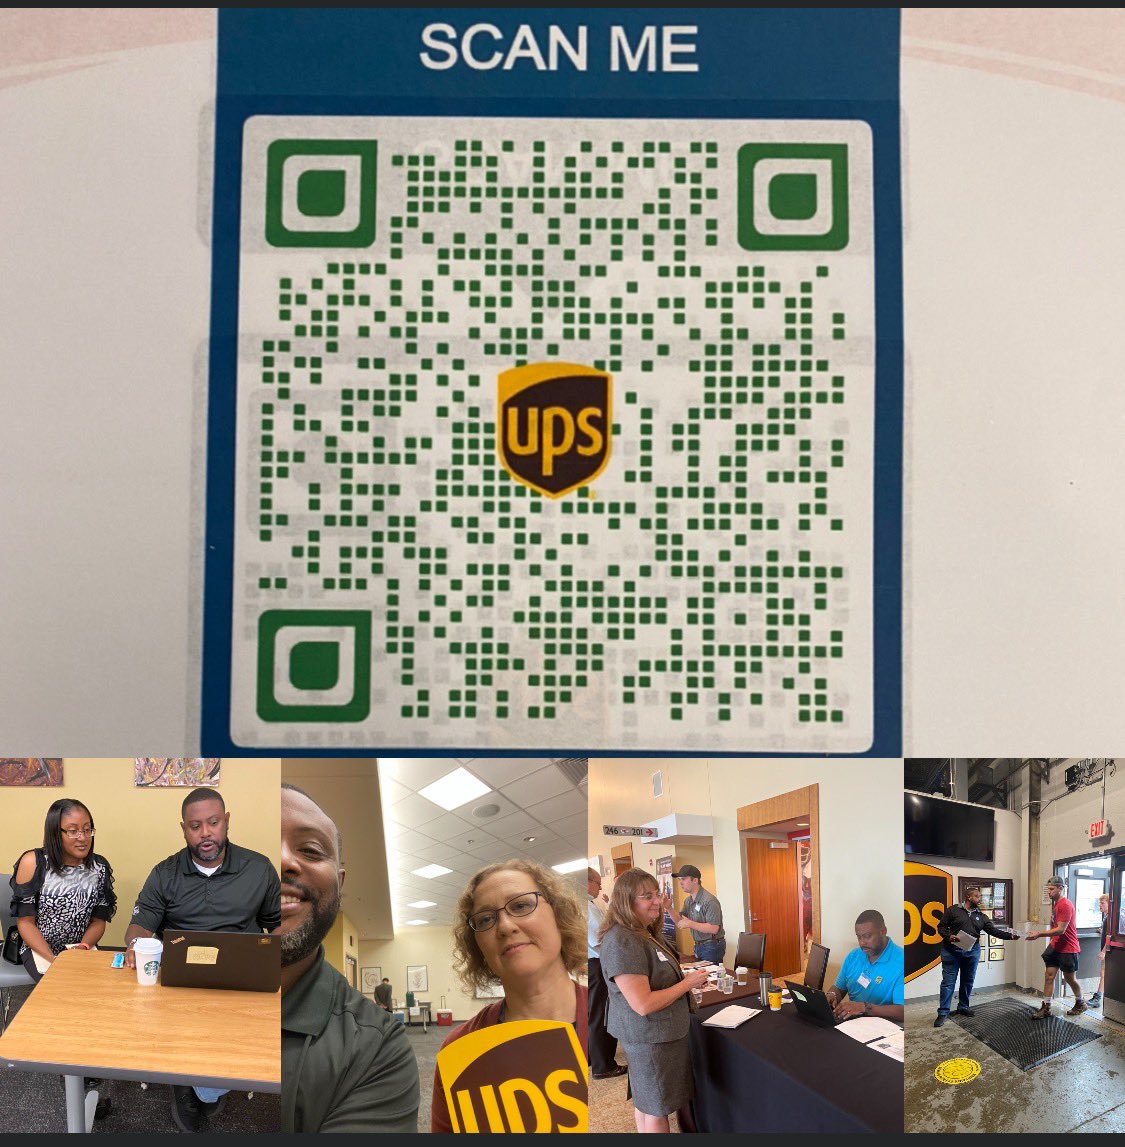 A very busy week in Kansas City. From The Home of the Chiefs to the surrounding UPS James Street Facility area’s. Don’t forget your Referrals! #ups.loop.jobs. We are hiring for Peak! #upsjobs @koltensmith10 @bwilliamskahf @NinjaCPRecruits @HRGalindoUPSers @jagrant1020